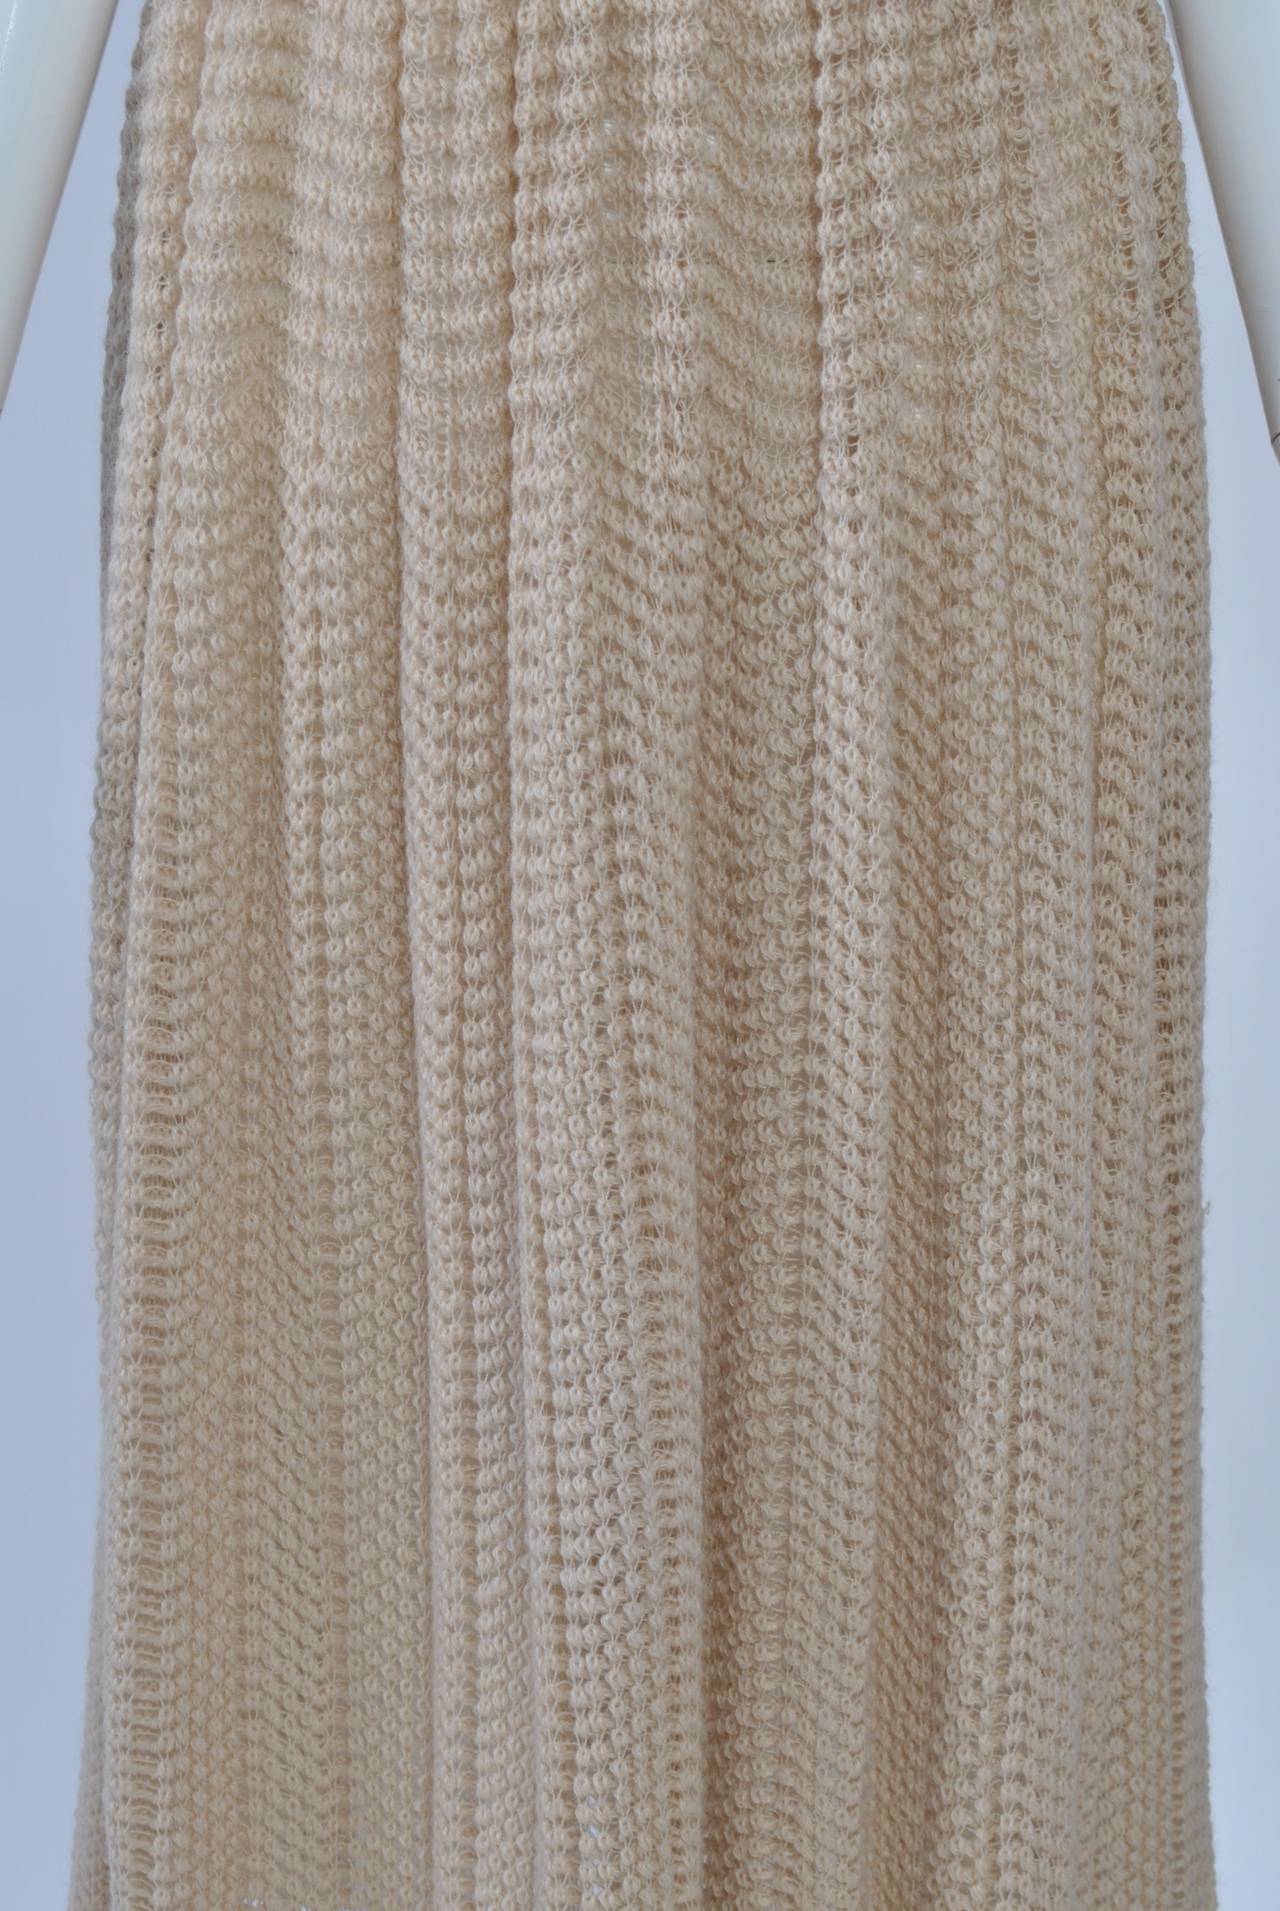 Missoni Beige Knit Skirt In Excellent Condition For Sale In Alford, MA